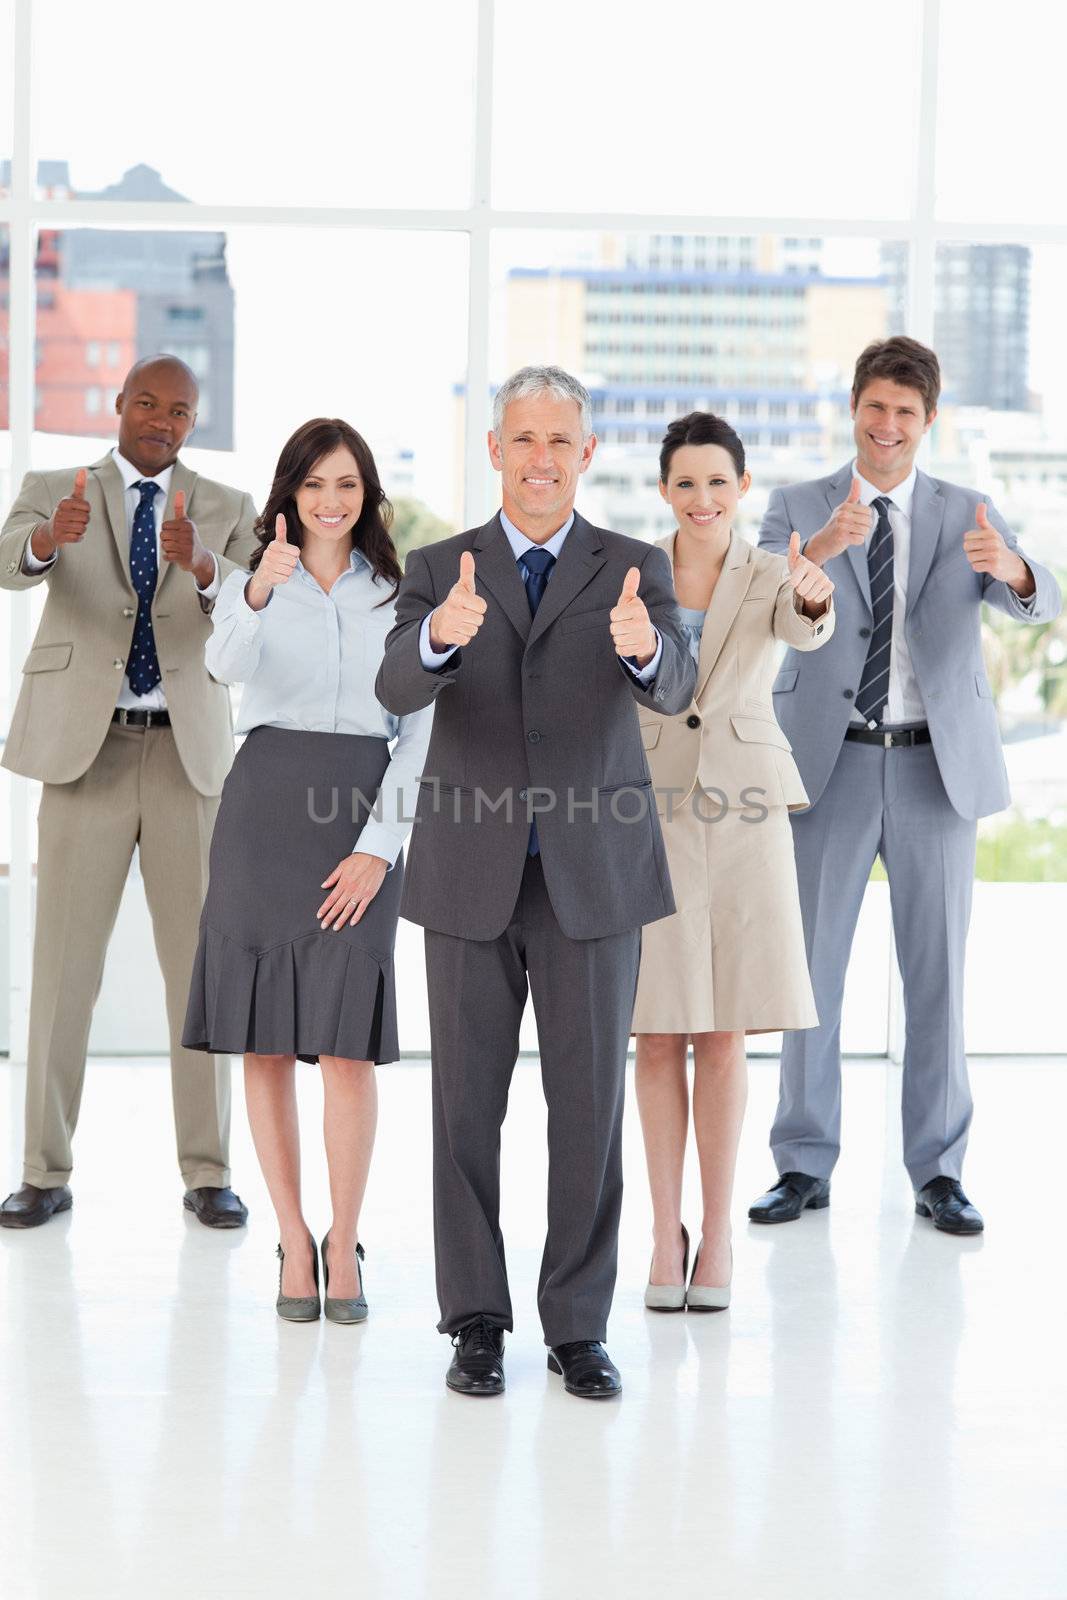 Business team standing together with their thumbs up in success by Wavebreakmedia